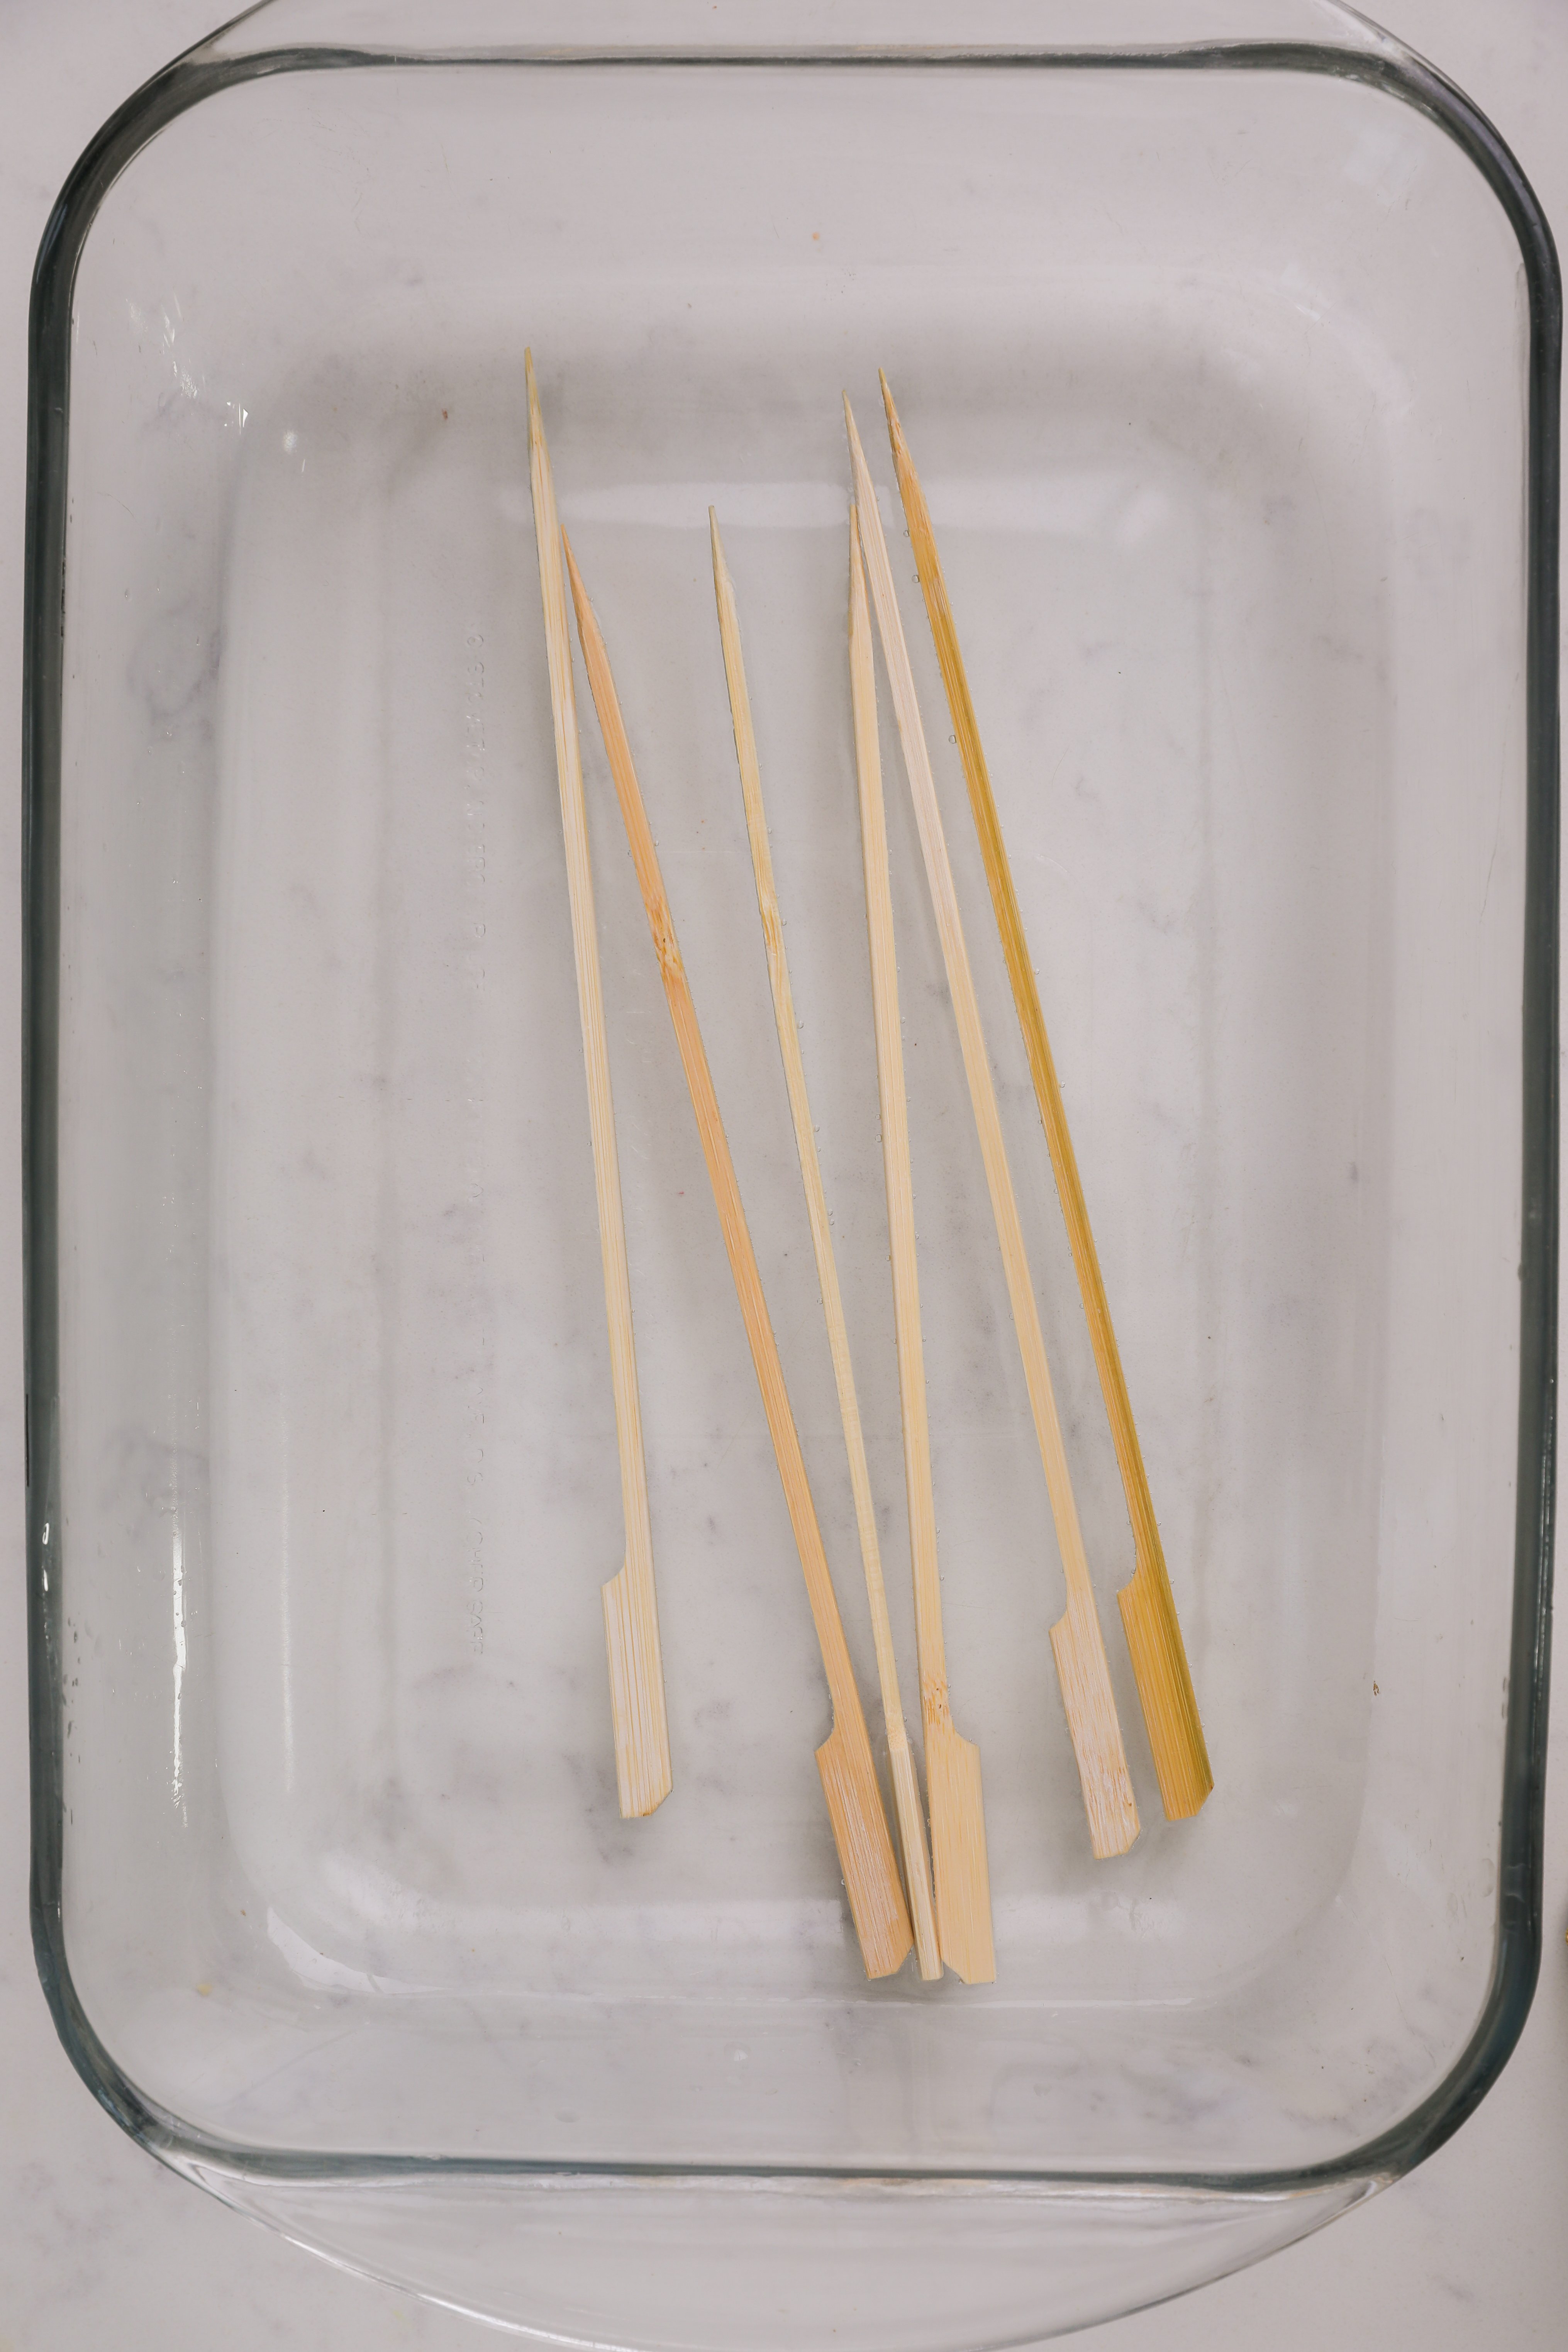 Six wooden skewers in a large glass dish.